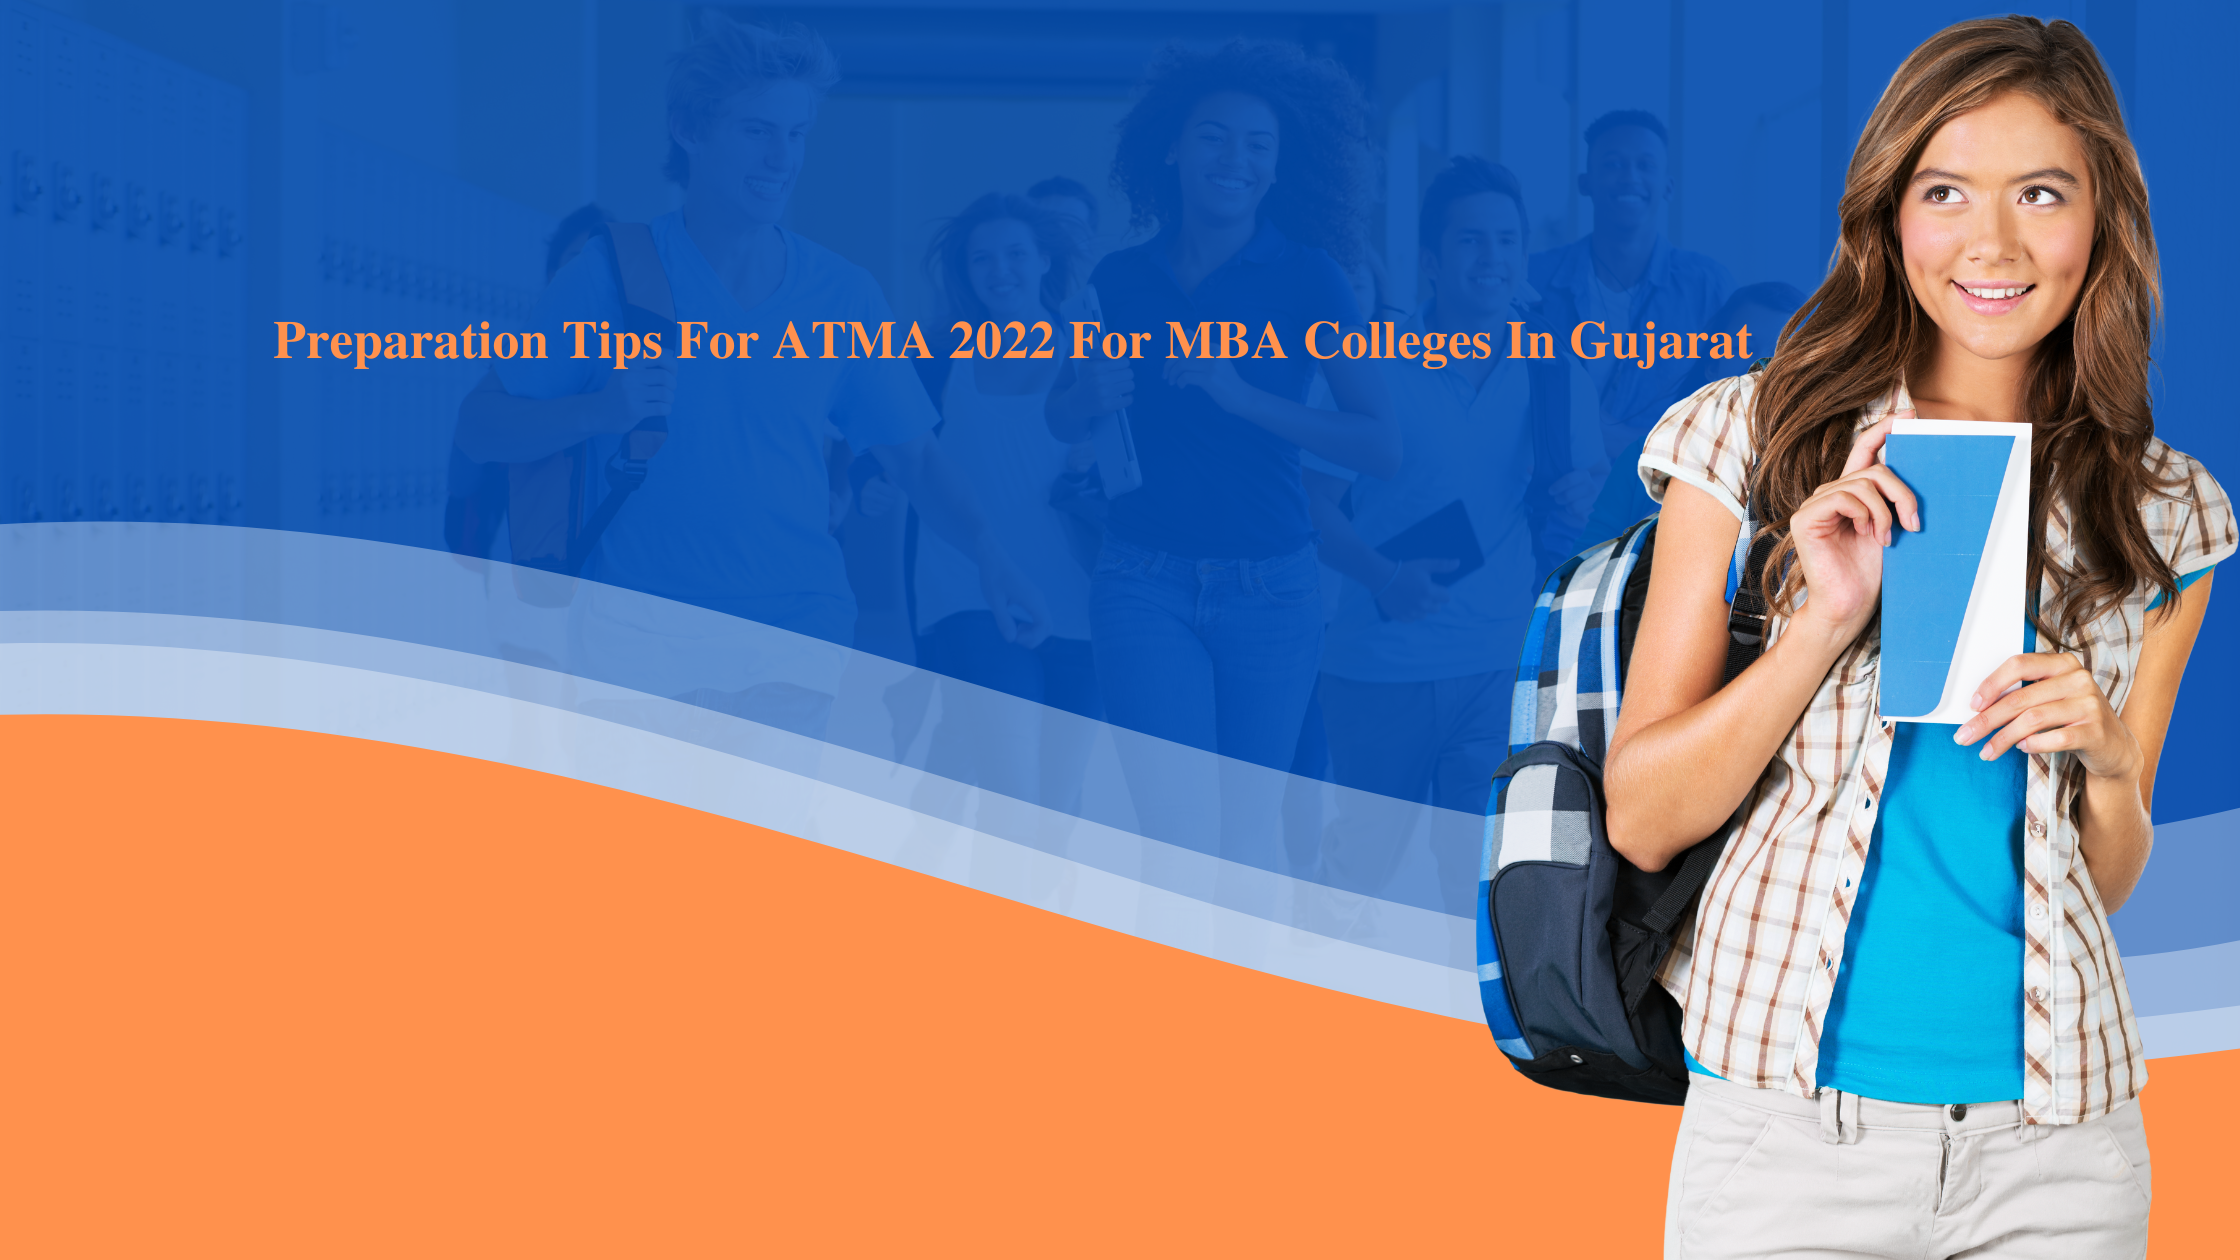 Preparation Tips For ATMA 2022 For MBA Colleges In Gujarat